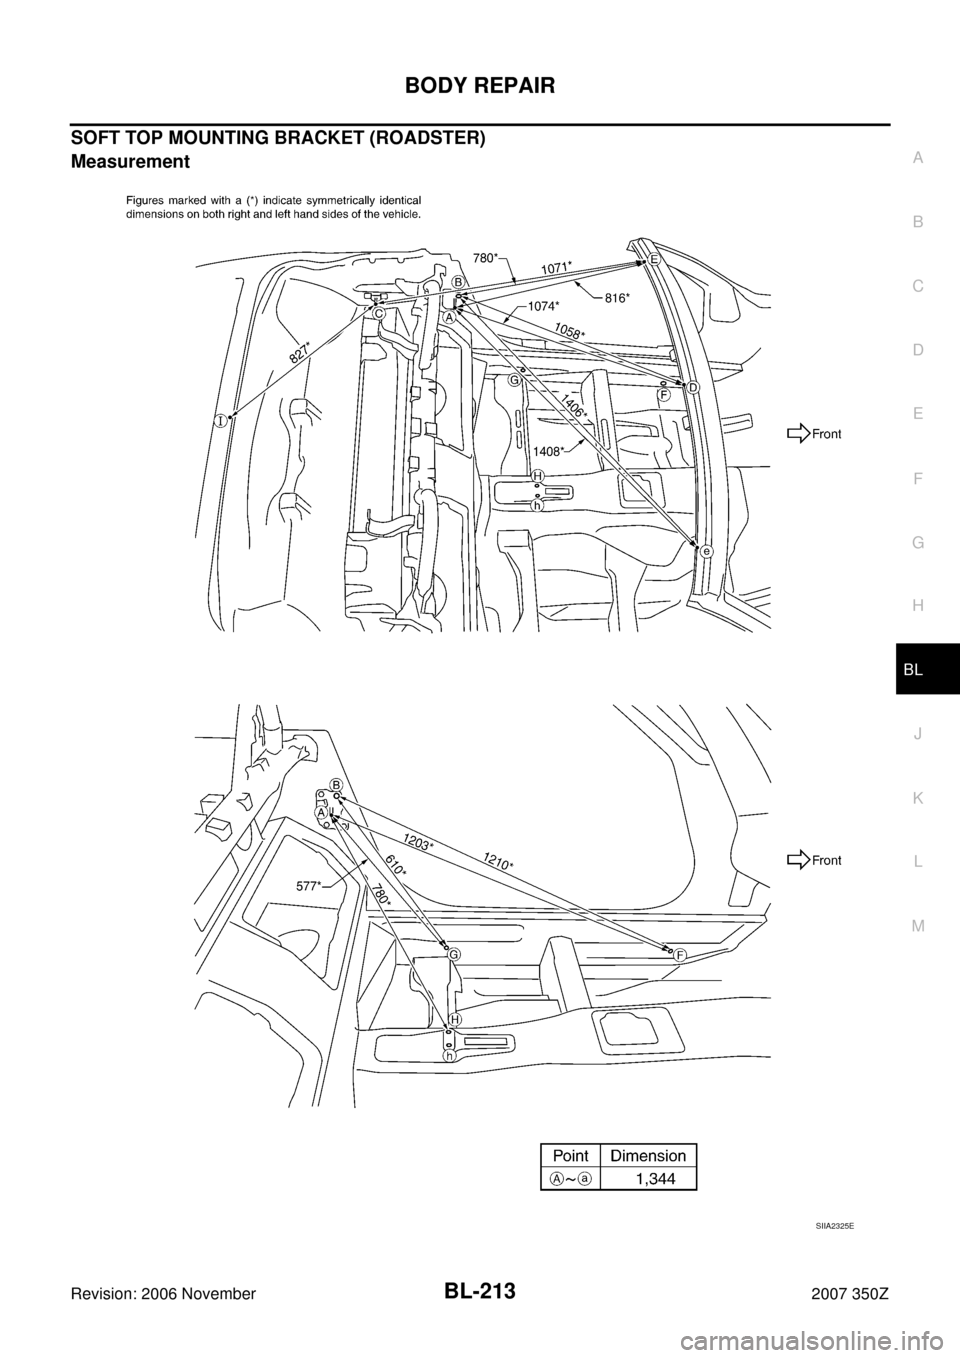 NISSAN 350Z 2007 Z33 Body, Lock And Security System Workshop Manual BODY REPAIR
BL-213
C
D
E
F
G
H
J
K
L
MA
B
BL
Revision: 2006 November2007 350Z
SOFT TOP MOUNTING BRACKET (ROADSTER)
Measurement
SIIA2325E 